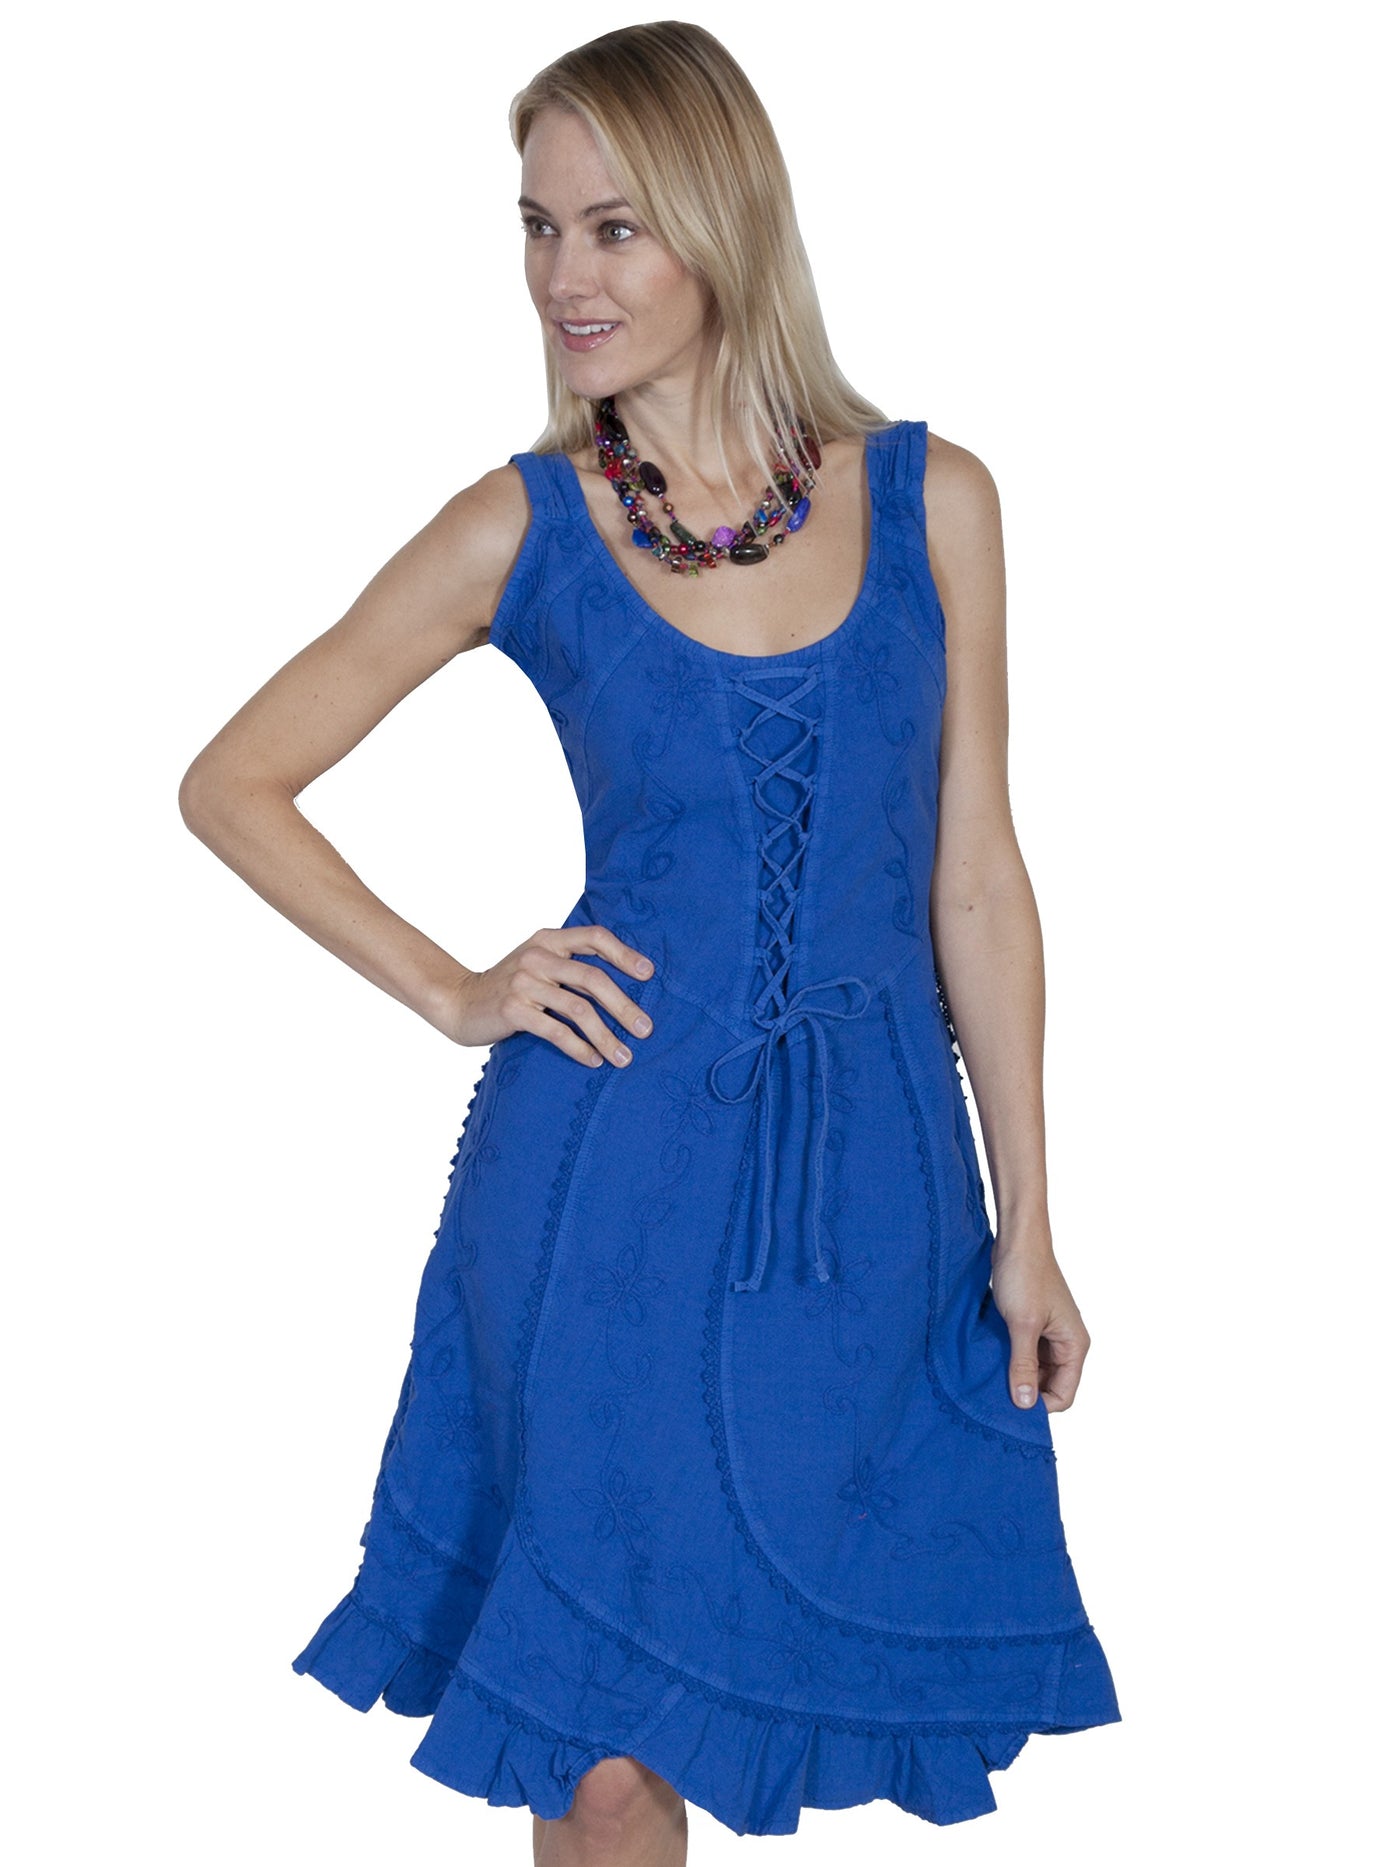 Western Romance Saloon Dress in Dazzling Blue - SOLD OUT